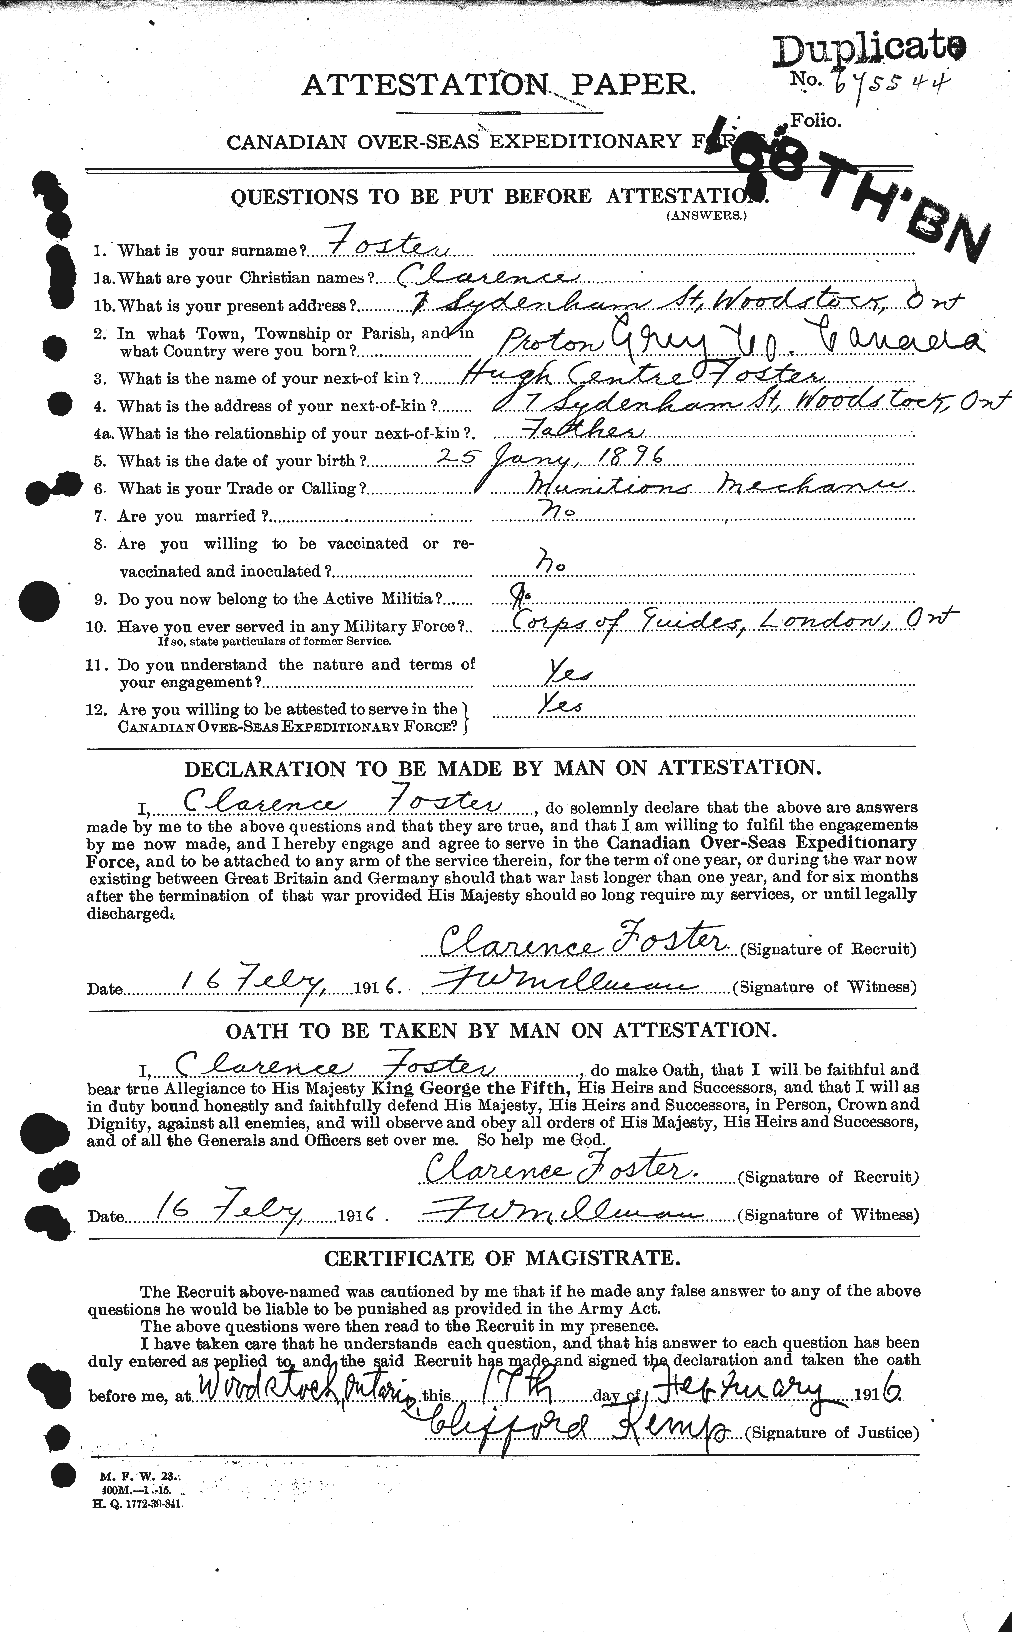 Personnel Records of the First World War - CEF 330533a